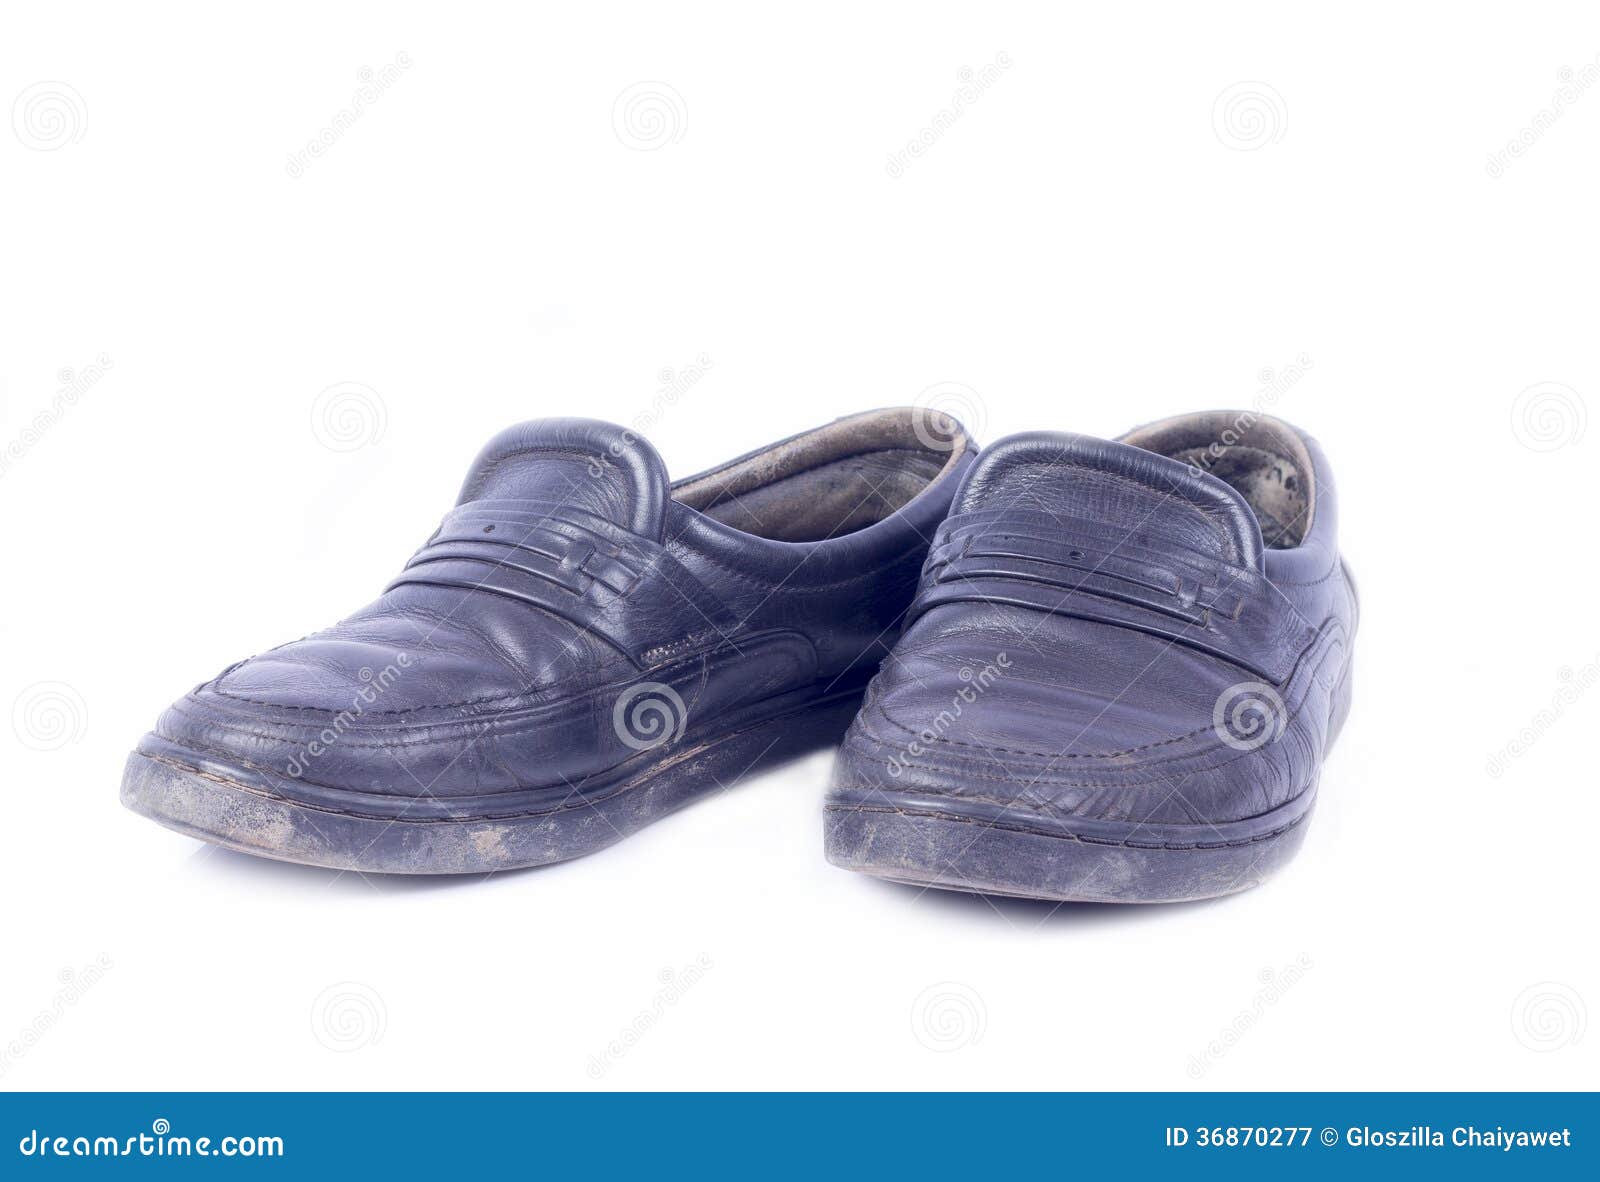 Old male business shoes stock image. Image of matt, casual - 36870277